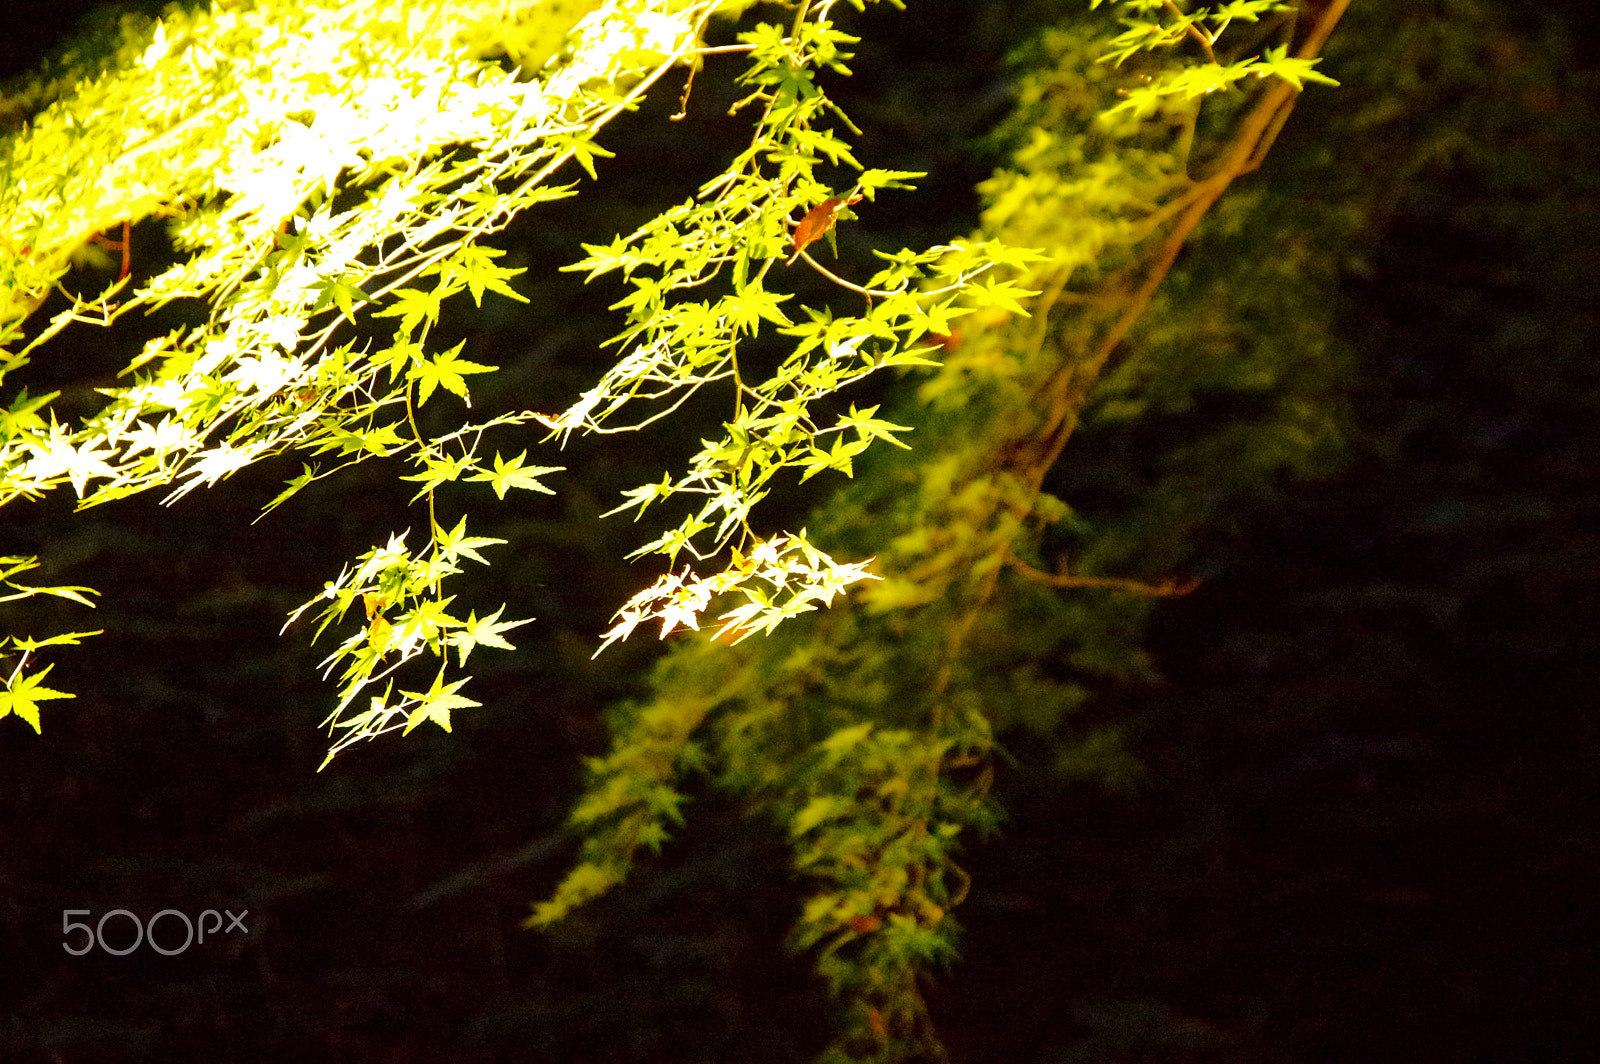 Pentax K-3 sample photo. Autumn leaves lighted up photography